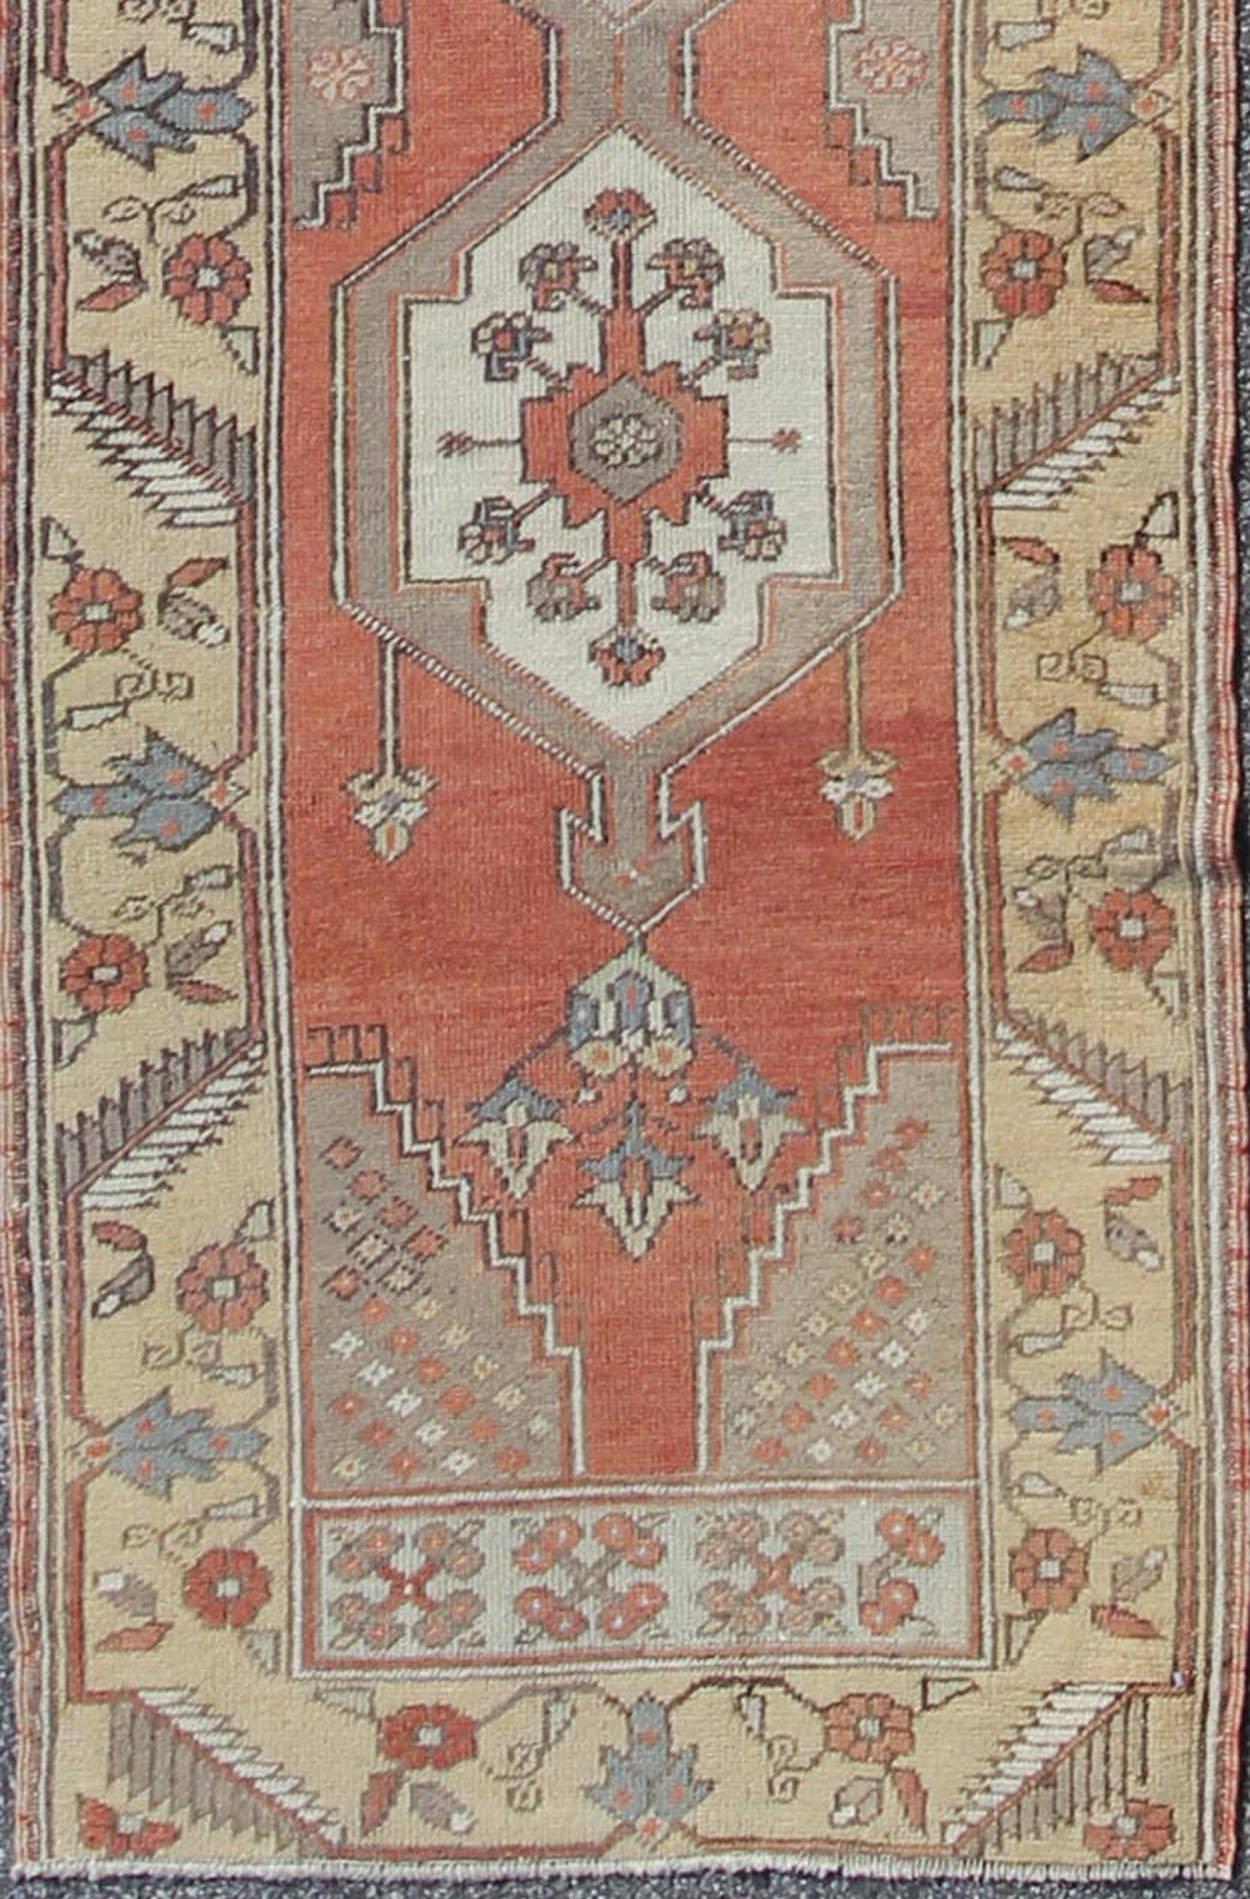 Sub-geometric tribal vintage Oushak runner from early 20th century Turkey, rug en-134, country of origin / type: Turkey / Oushak, circa 1920

This antique Turkish Oushak gallery runner (circa early 20th century) features a unique blend of colors and